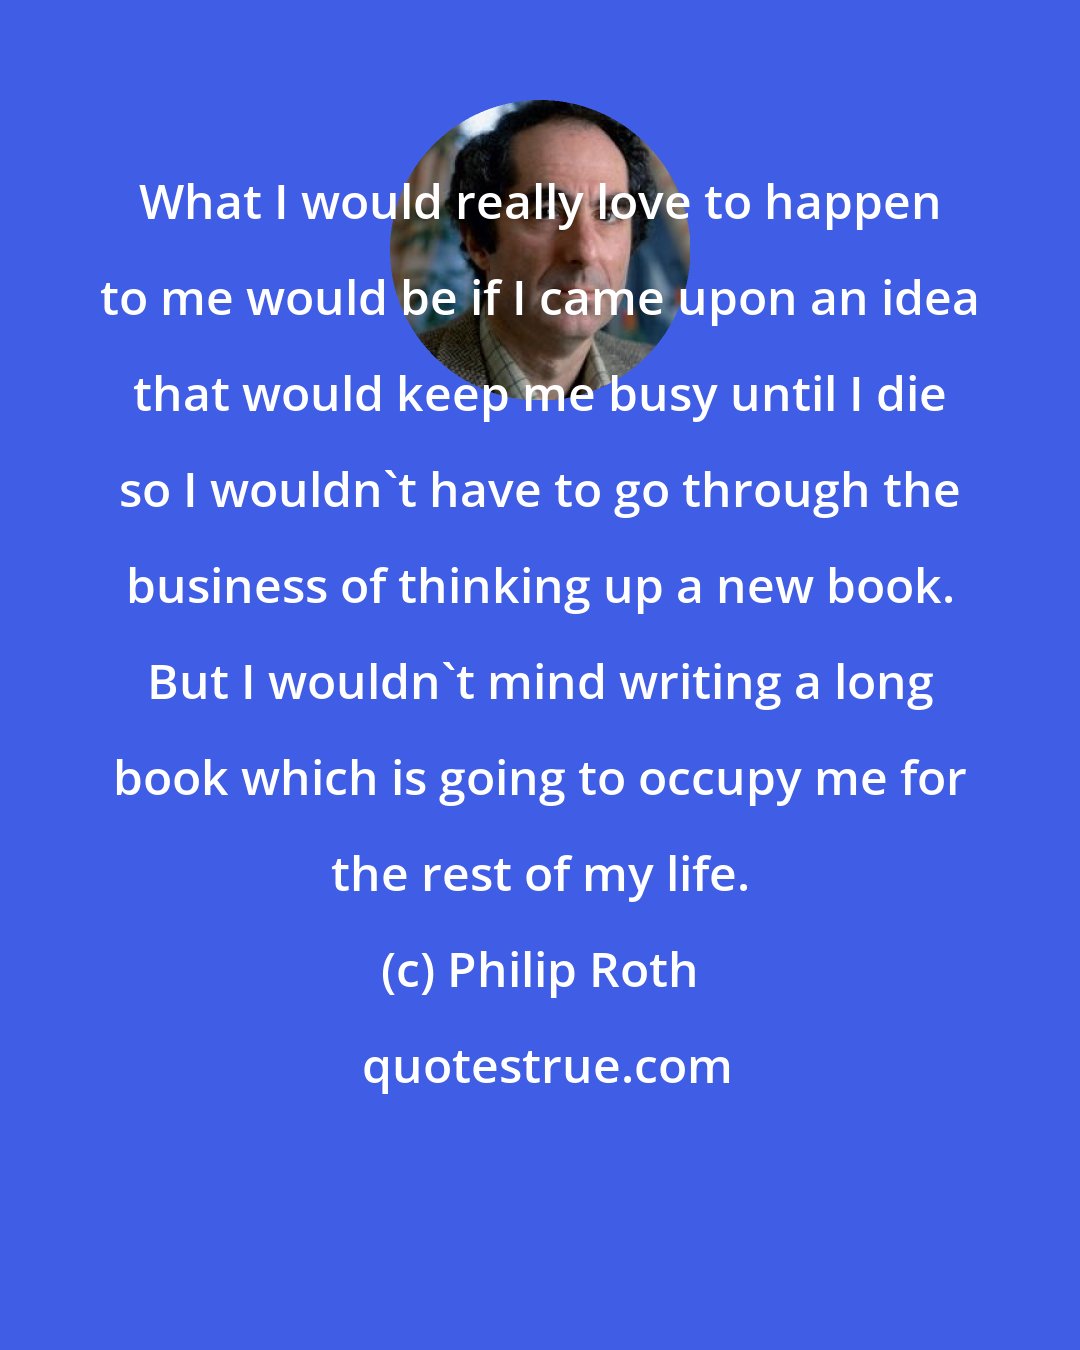 Philip Roth: What I would really love to happen to me would be if I came upon an idea that would keep me busy until I die so I wouldn't have to go through the business of thinking up a new book. But I wouldn't mind writing a long book which is going to occupy me for the rest of my life.